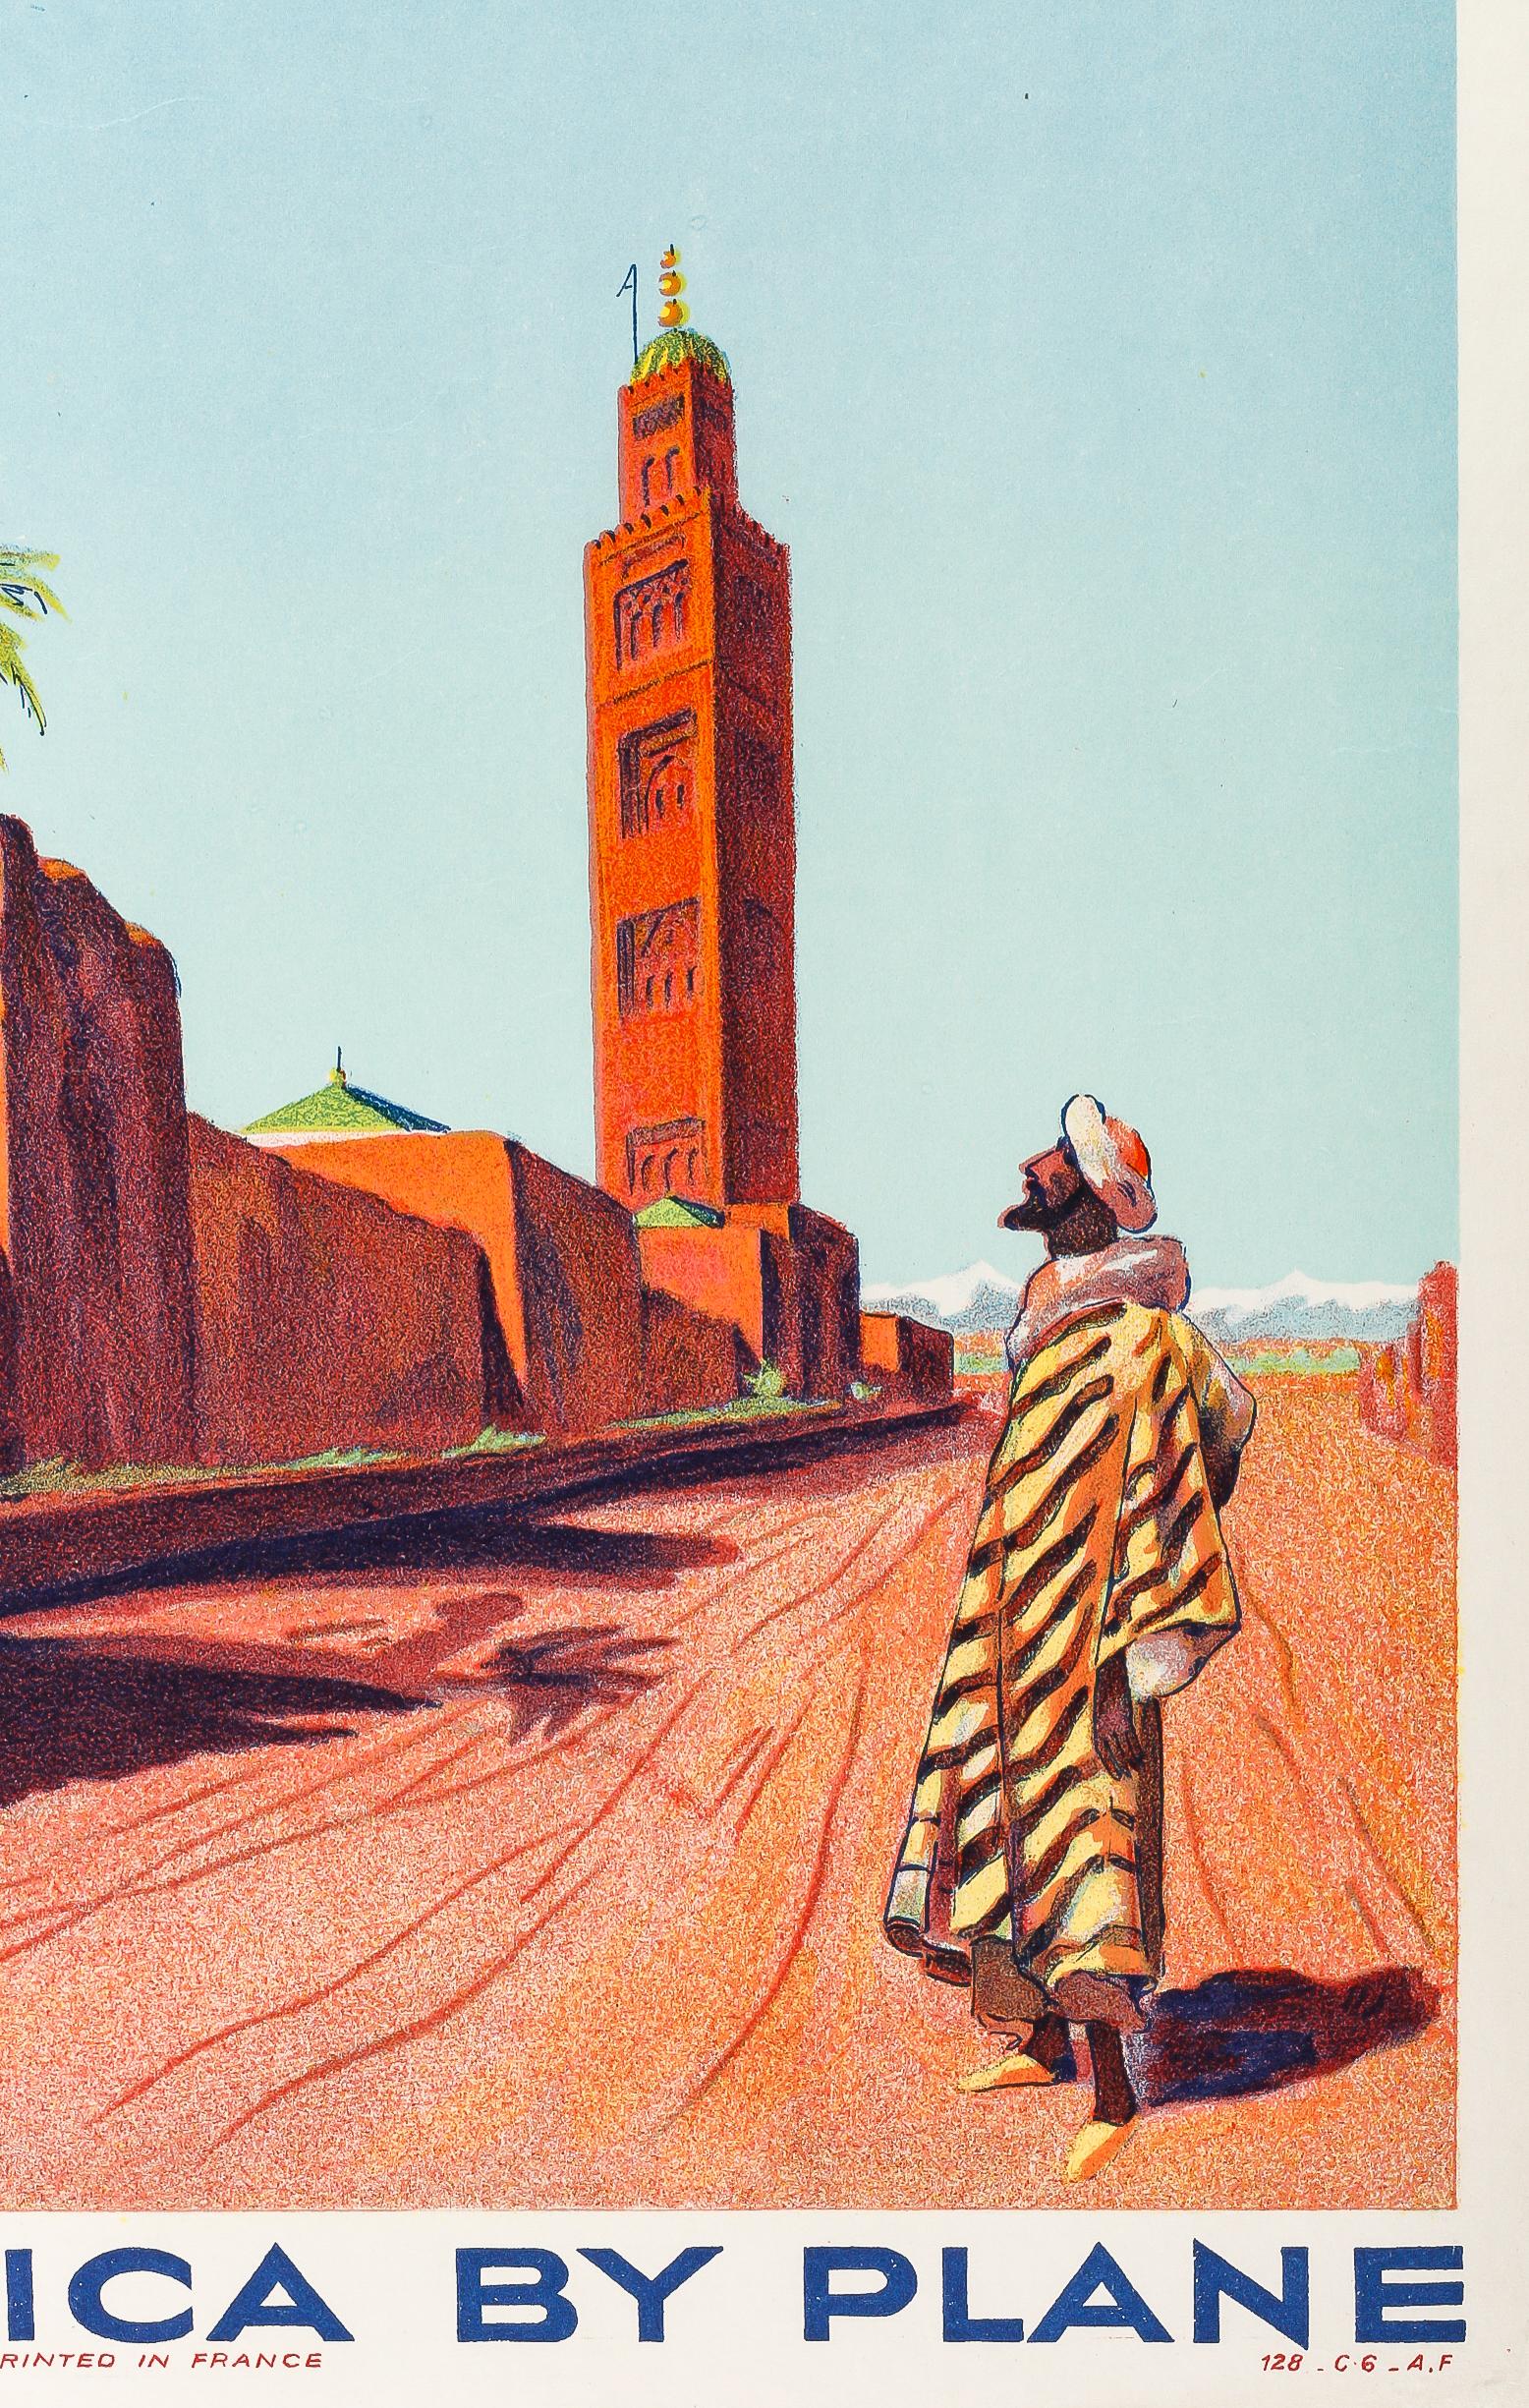 French Original Air France Poster, North Africa by plane, Morocco Atlas, Koutoubia 1934 For Sale